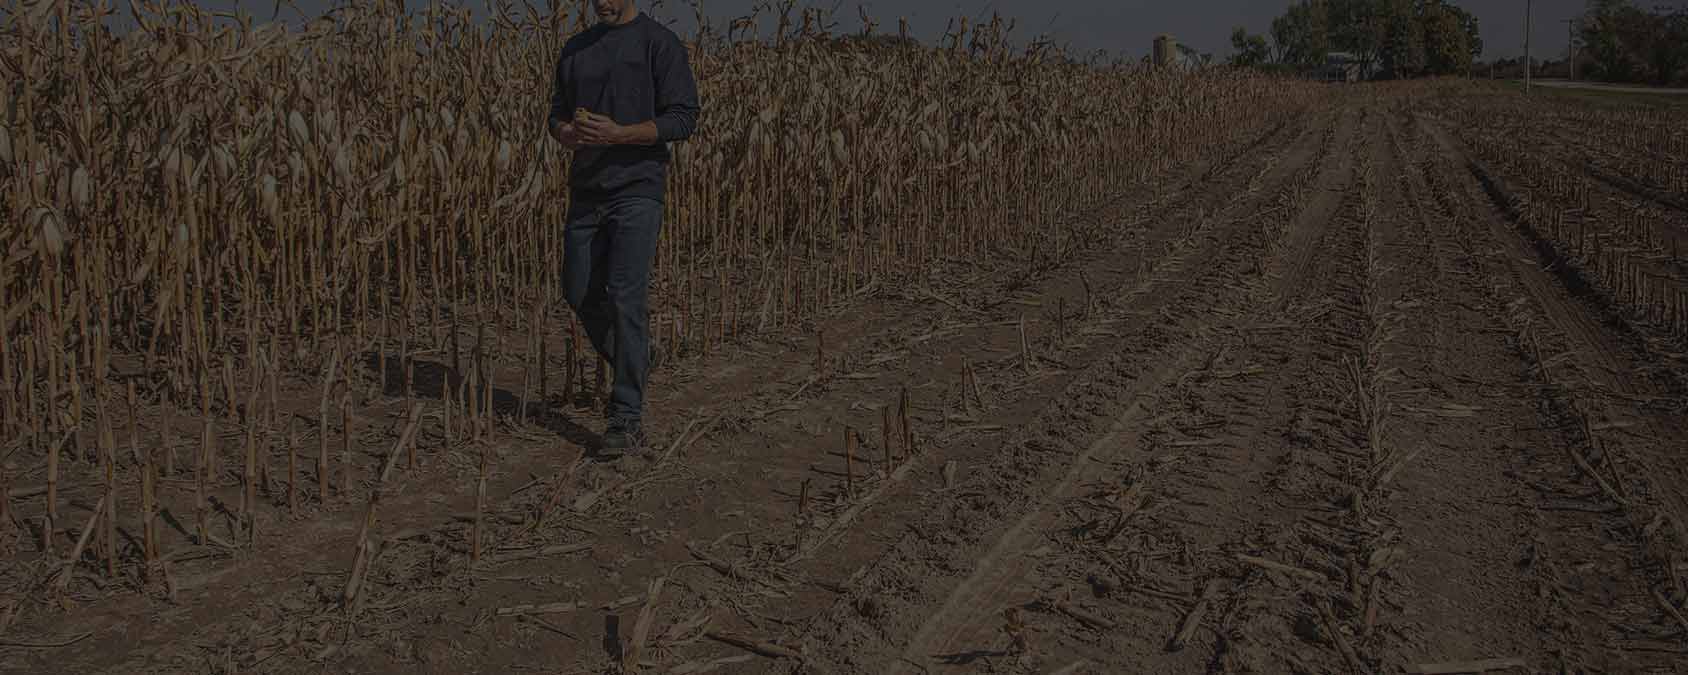 A man strolls through a corn field with comfortable jeans